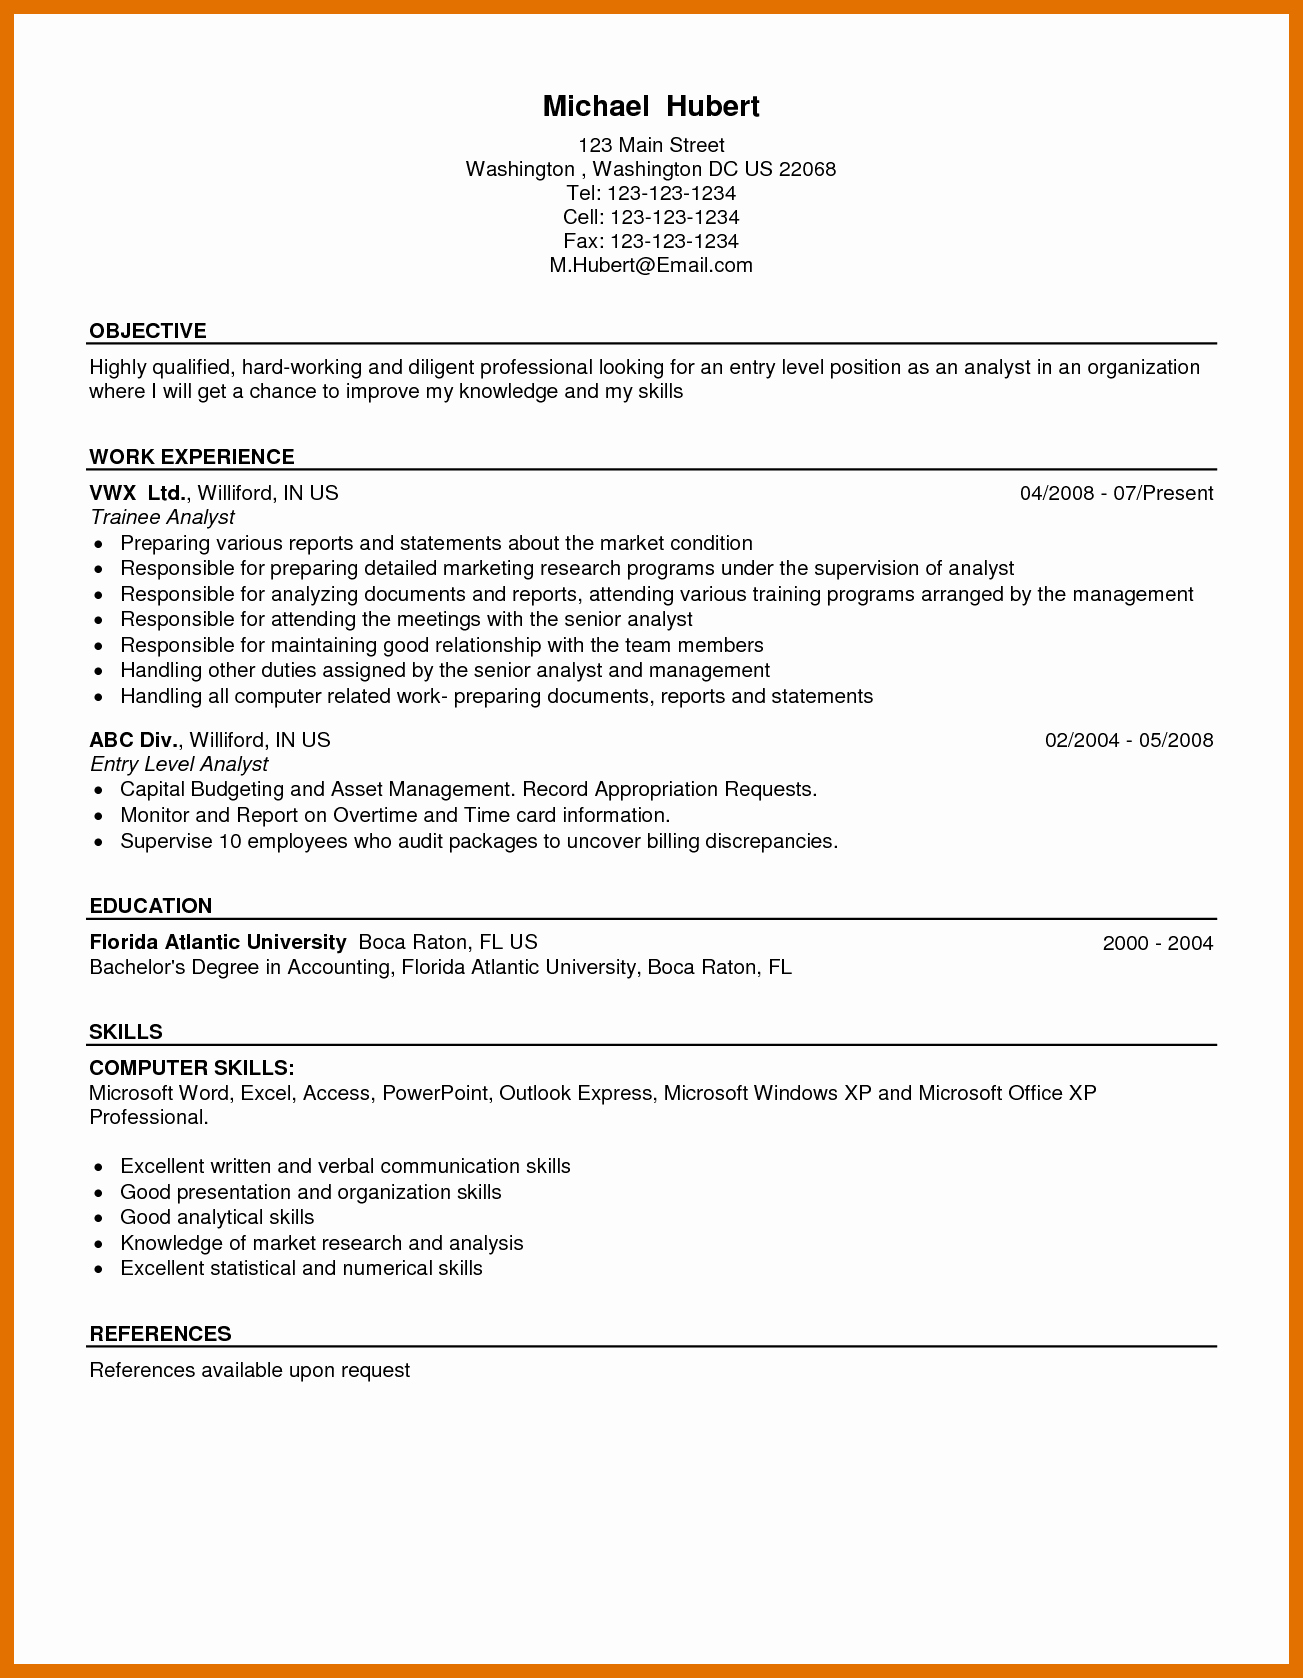 5 6 Resume Summary for Entry Level Position